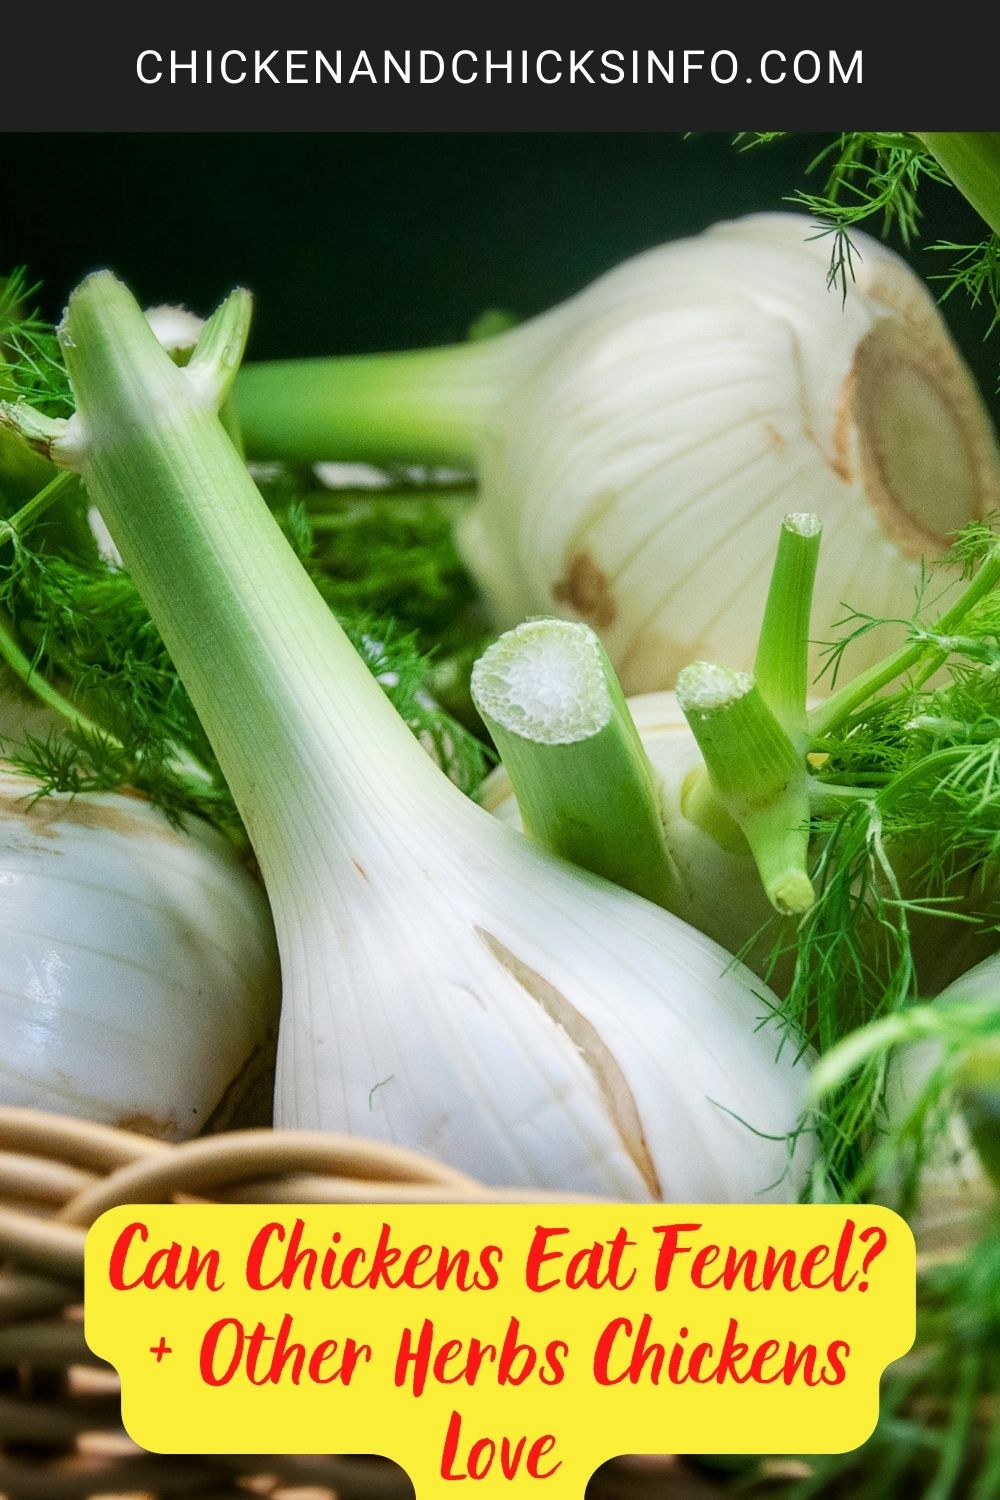 Can Chickens Eat Fennel? + Other Herbs Chickens Love poster.
